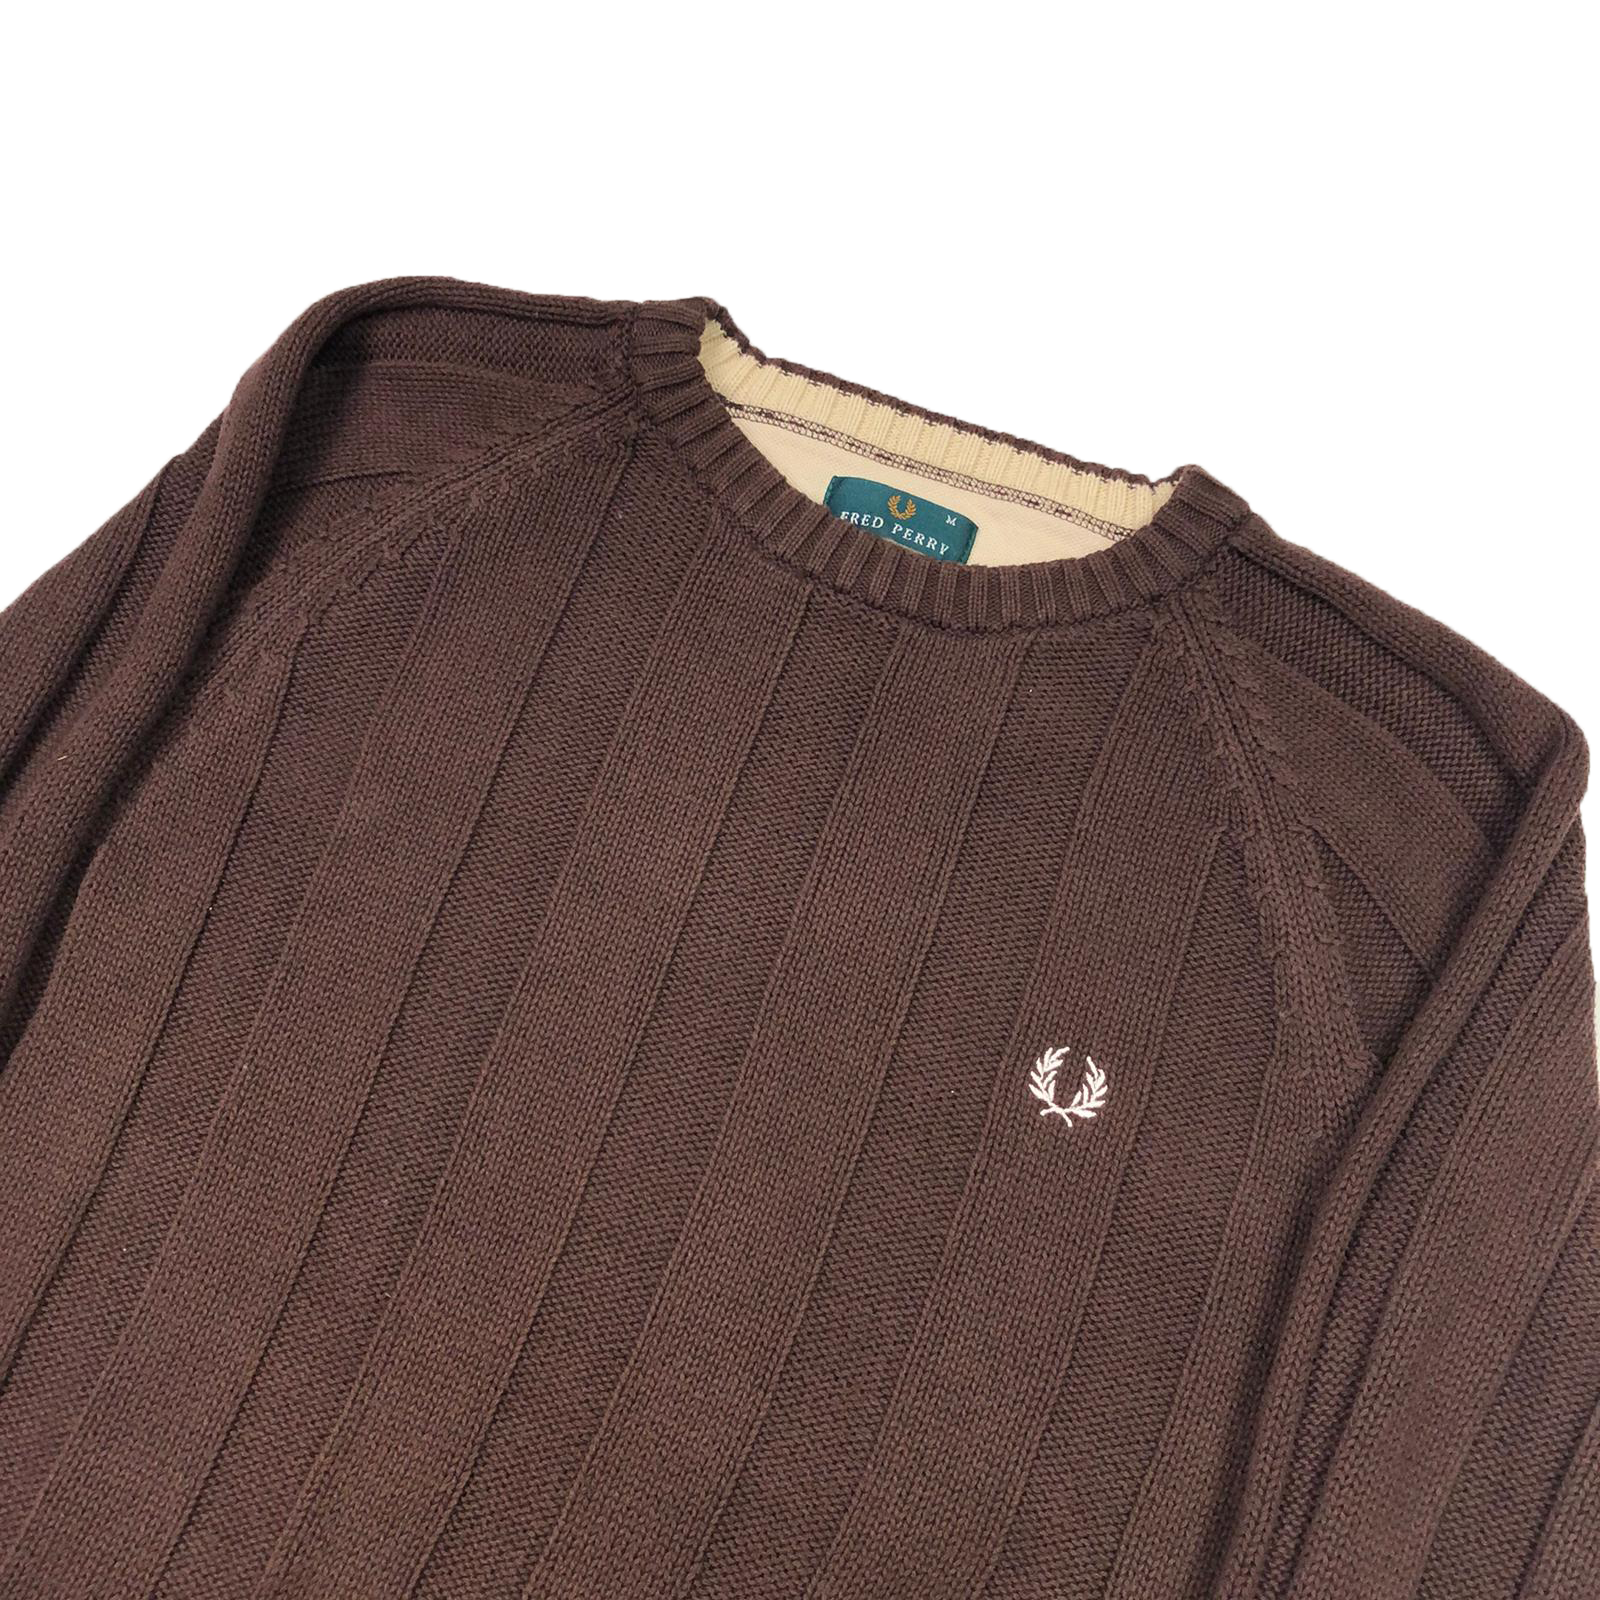 Fred Perry knit sweatshirt